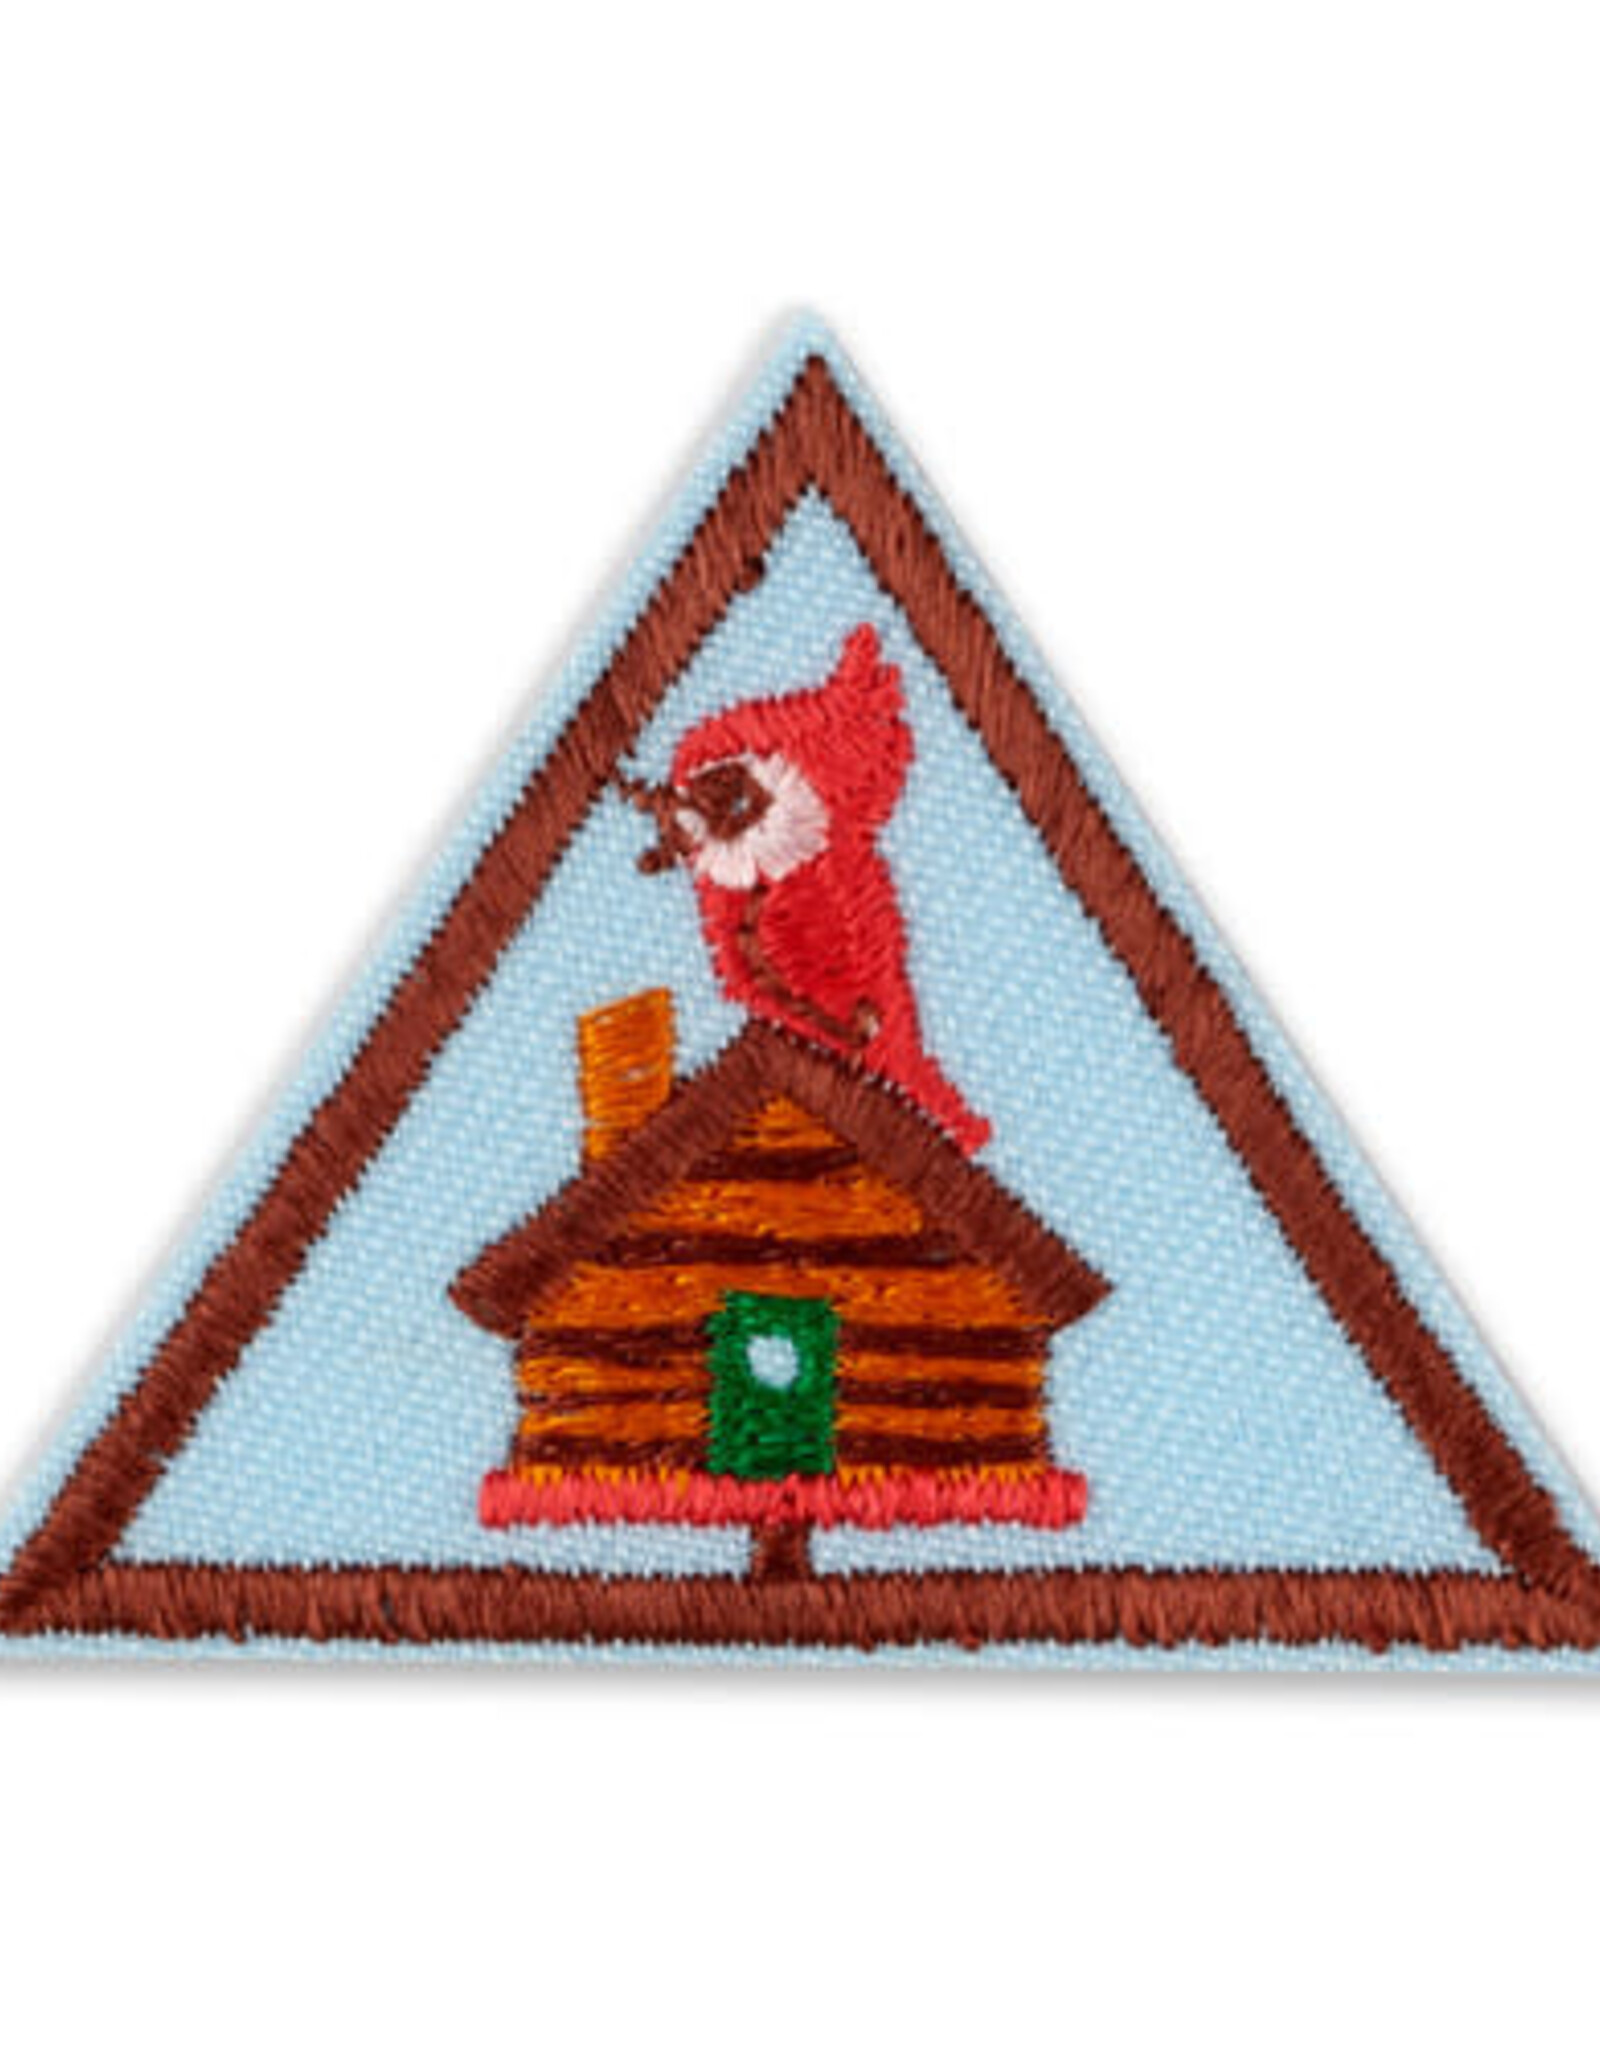 GIRL SCOUTS OF THE USA Brownie Cabin Camper Badge